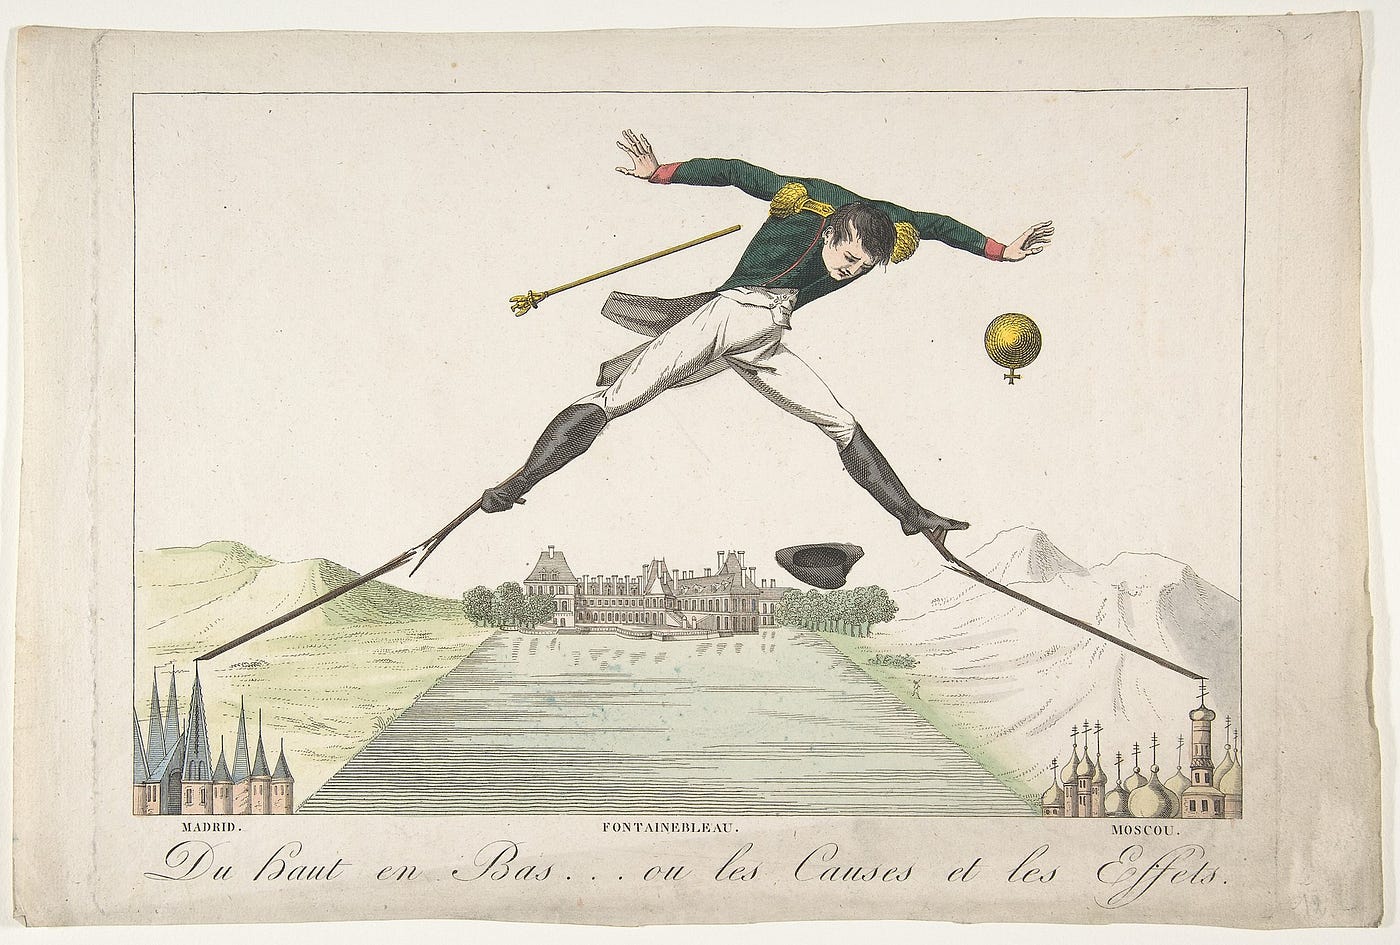 Illustration of Napoleon falling from splintering stilts that rest on Madrid and Moscow.